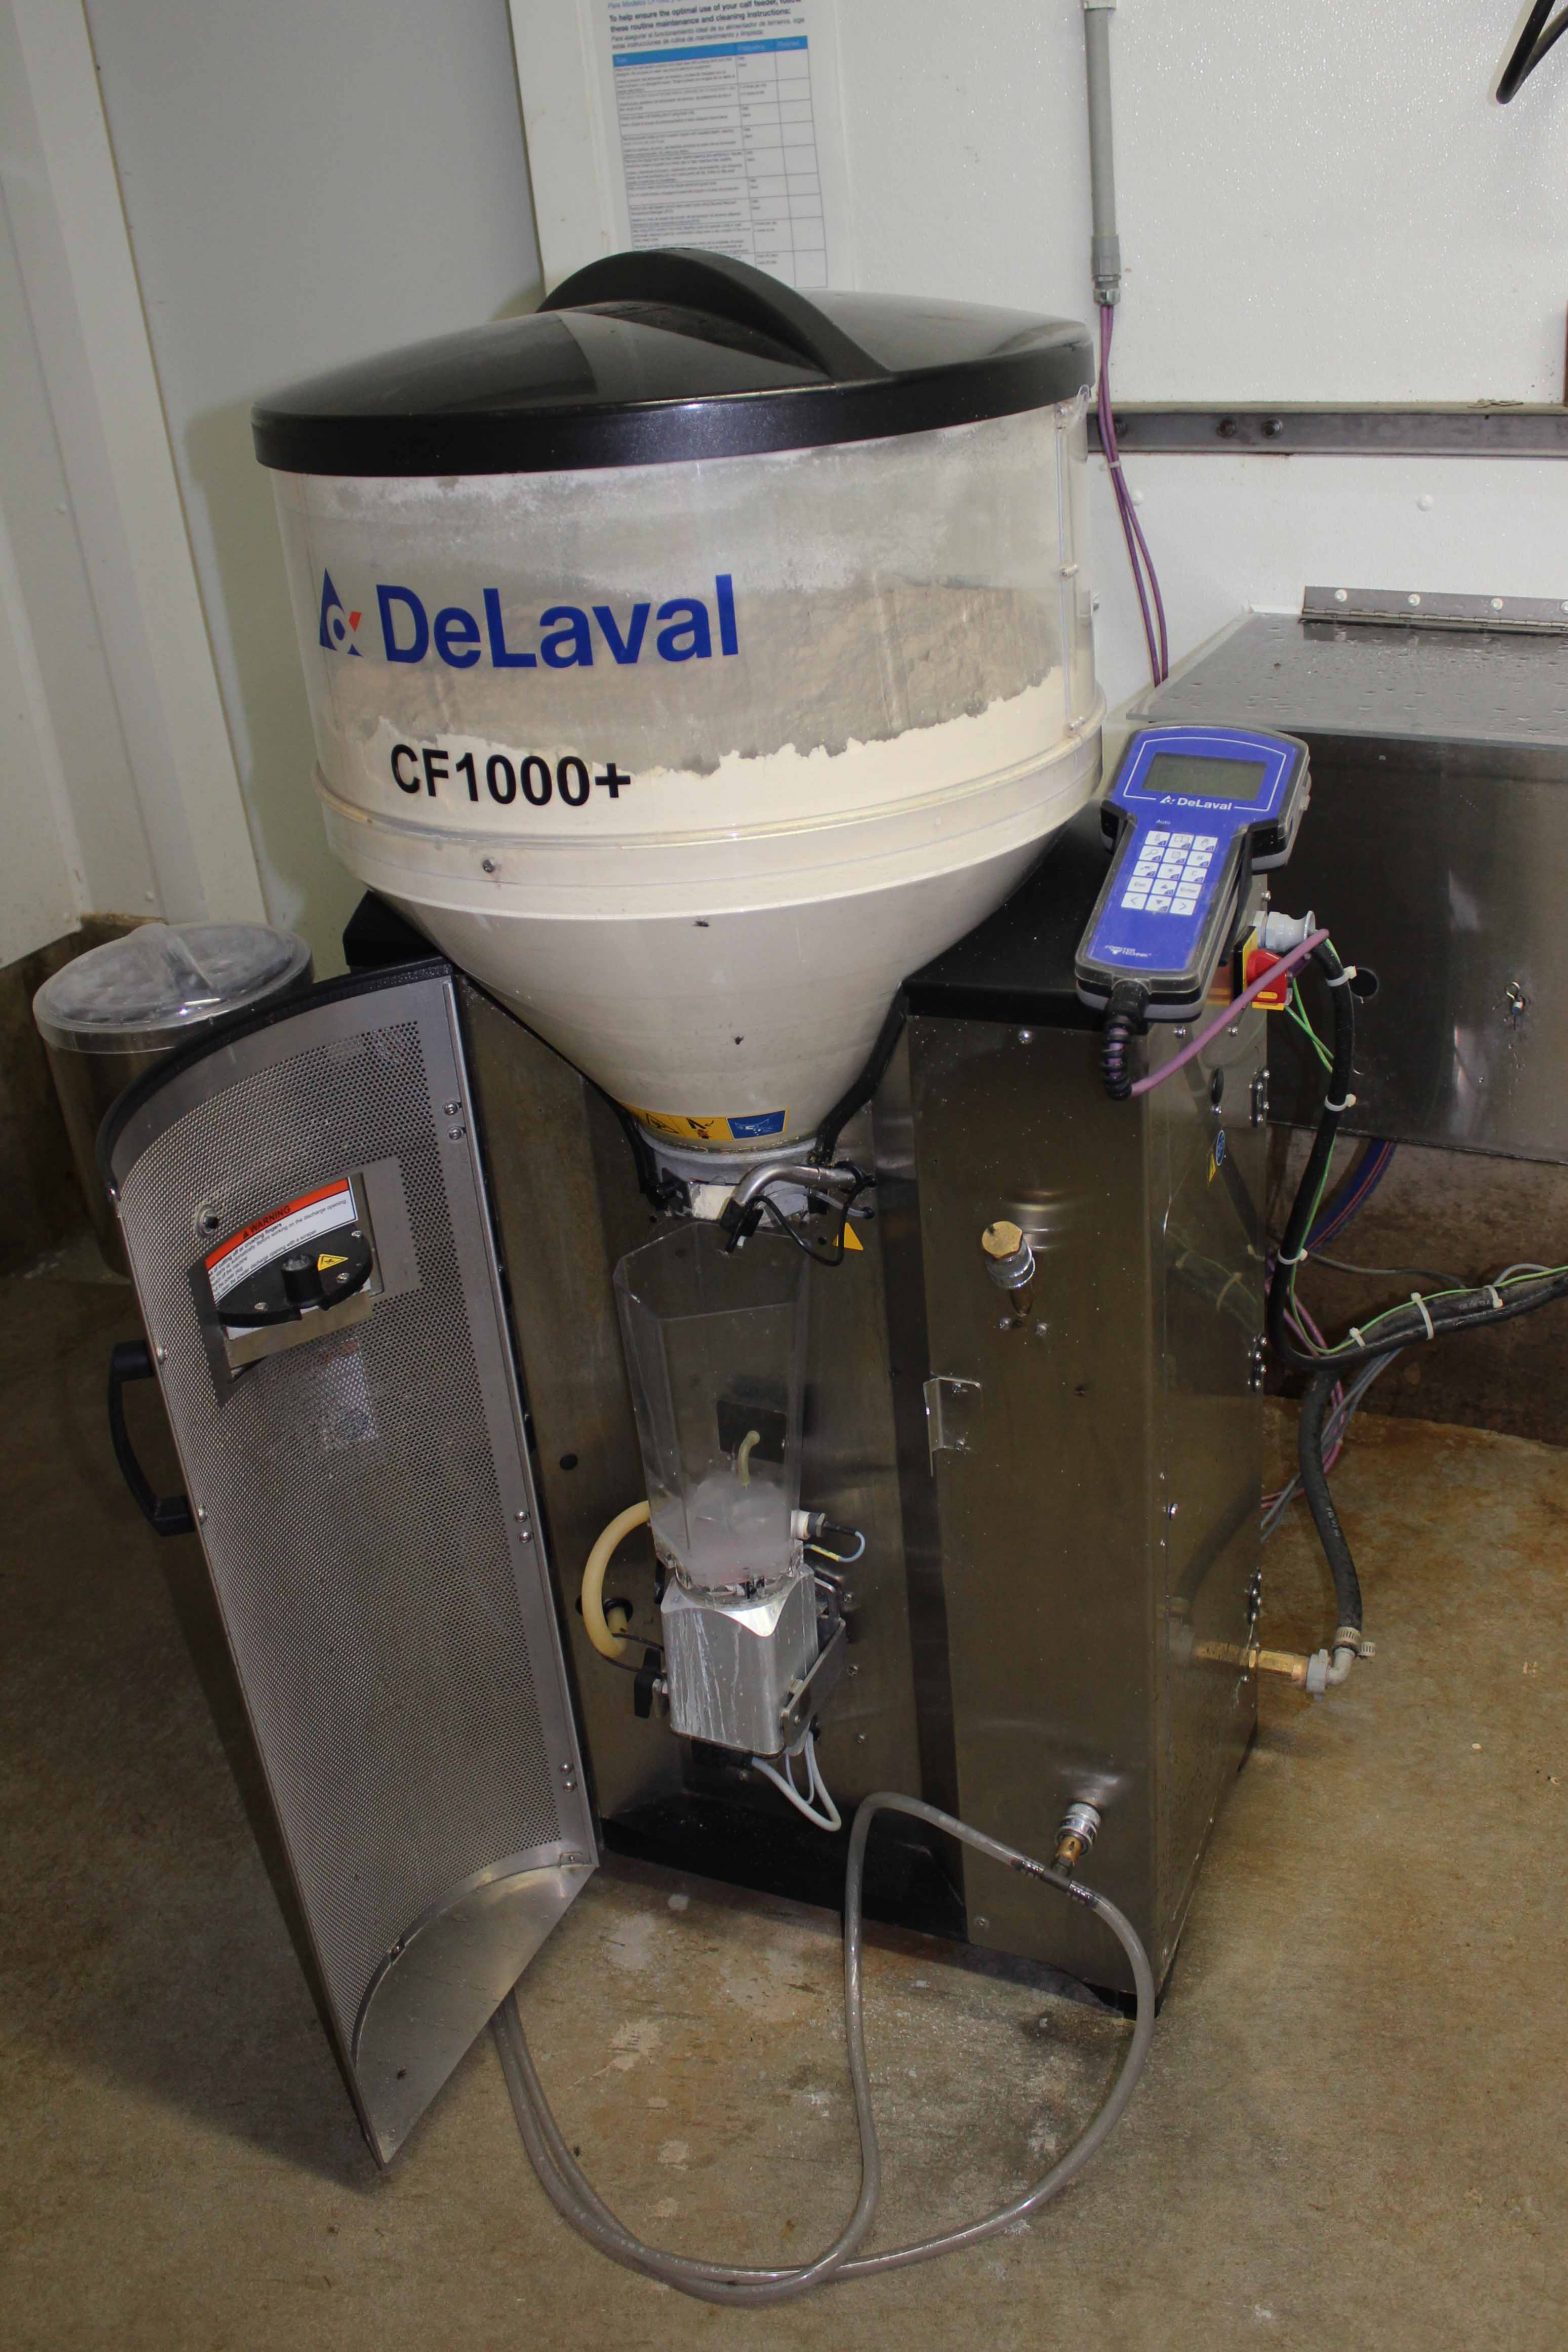 Almost two years ago, the team at Creamery Creek Holsteins LLC in Bangor, Wisconsin installed two DeLaval automatic calf feeders.  Manager Justin Peterson said he decided to install this technology to gain efficiencies in labor, improve the environment for calves and employees, and feed to a higher plane of nutrition.